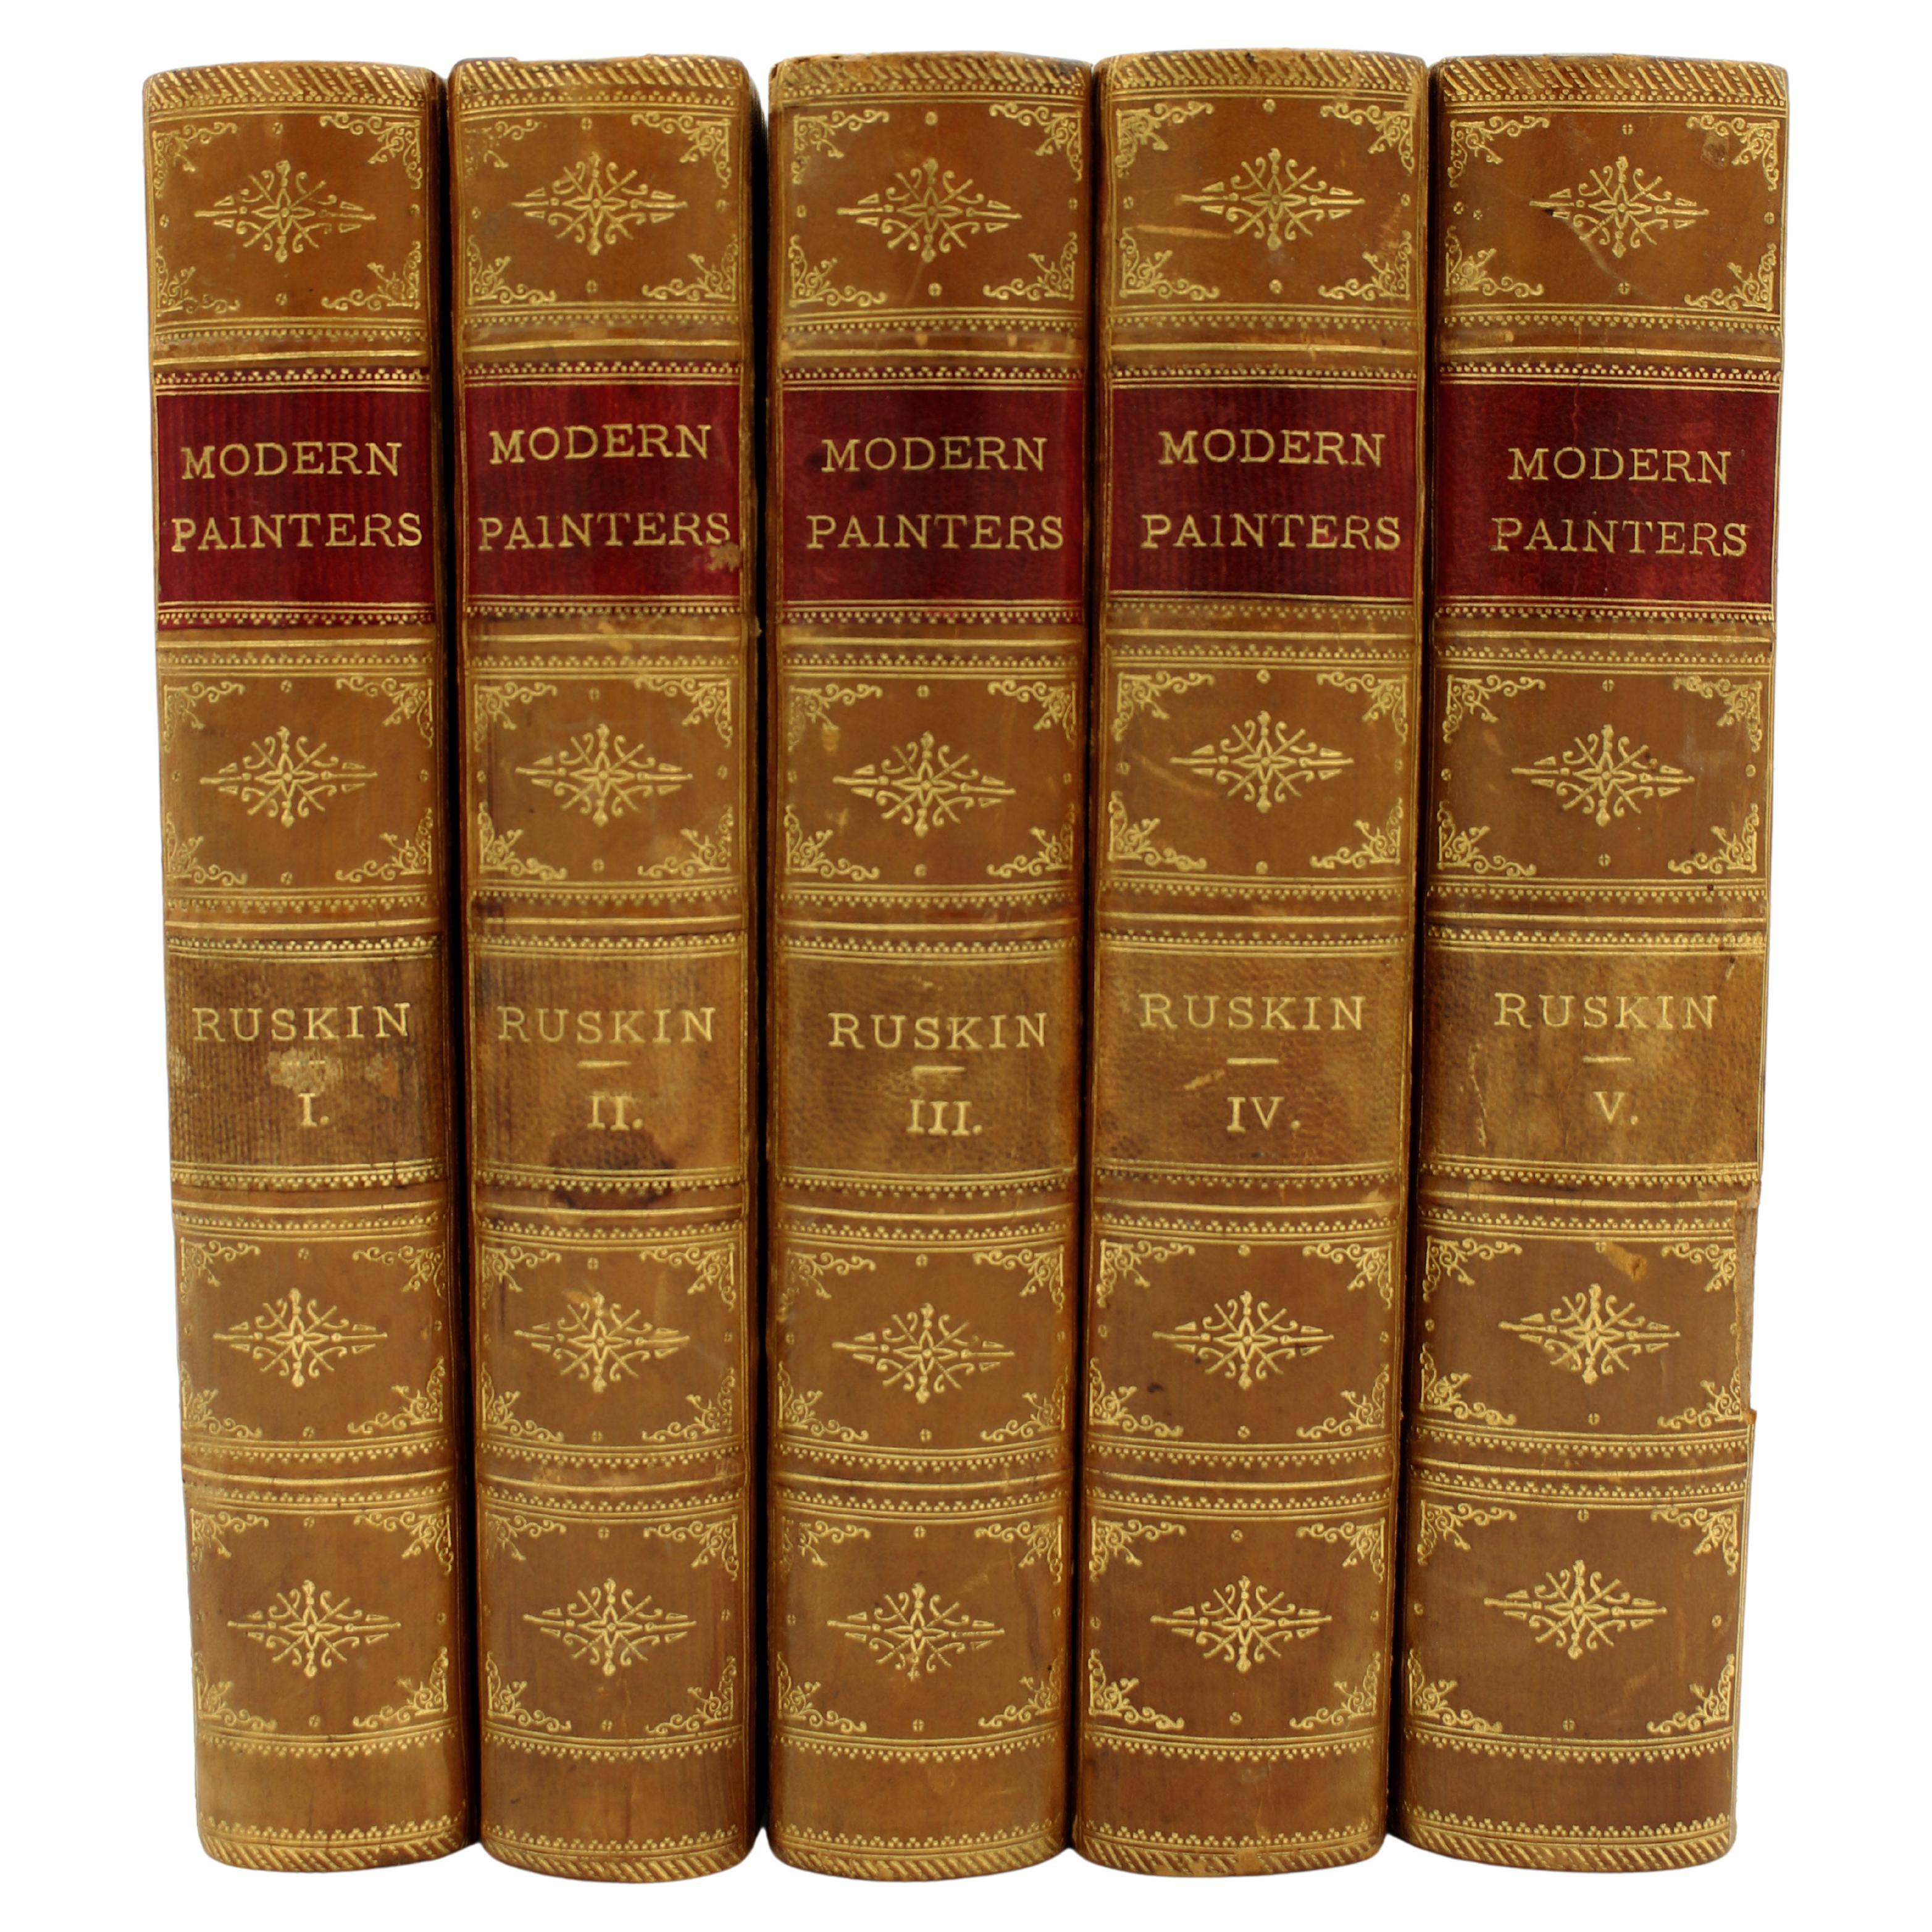 Late 19th Century "Modern Painters" Books by Ruskin, Set of 5